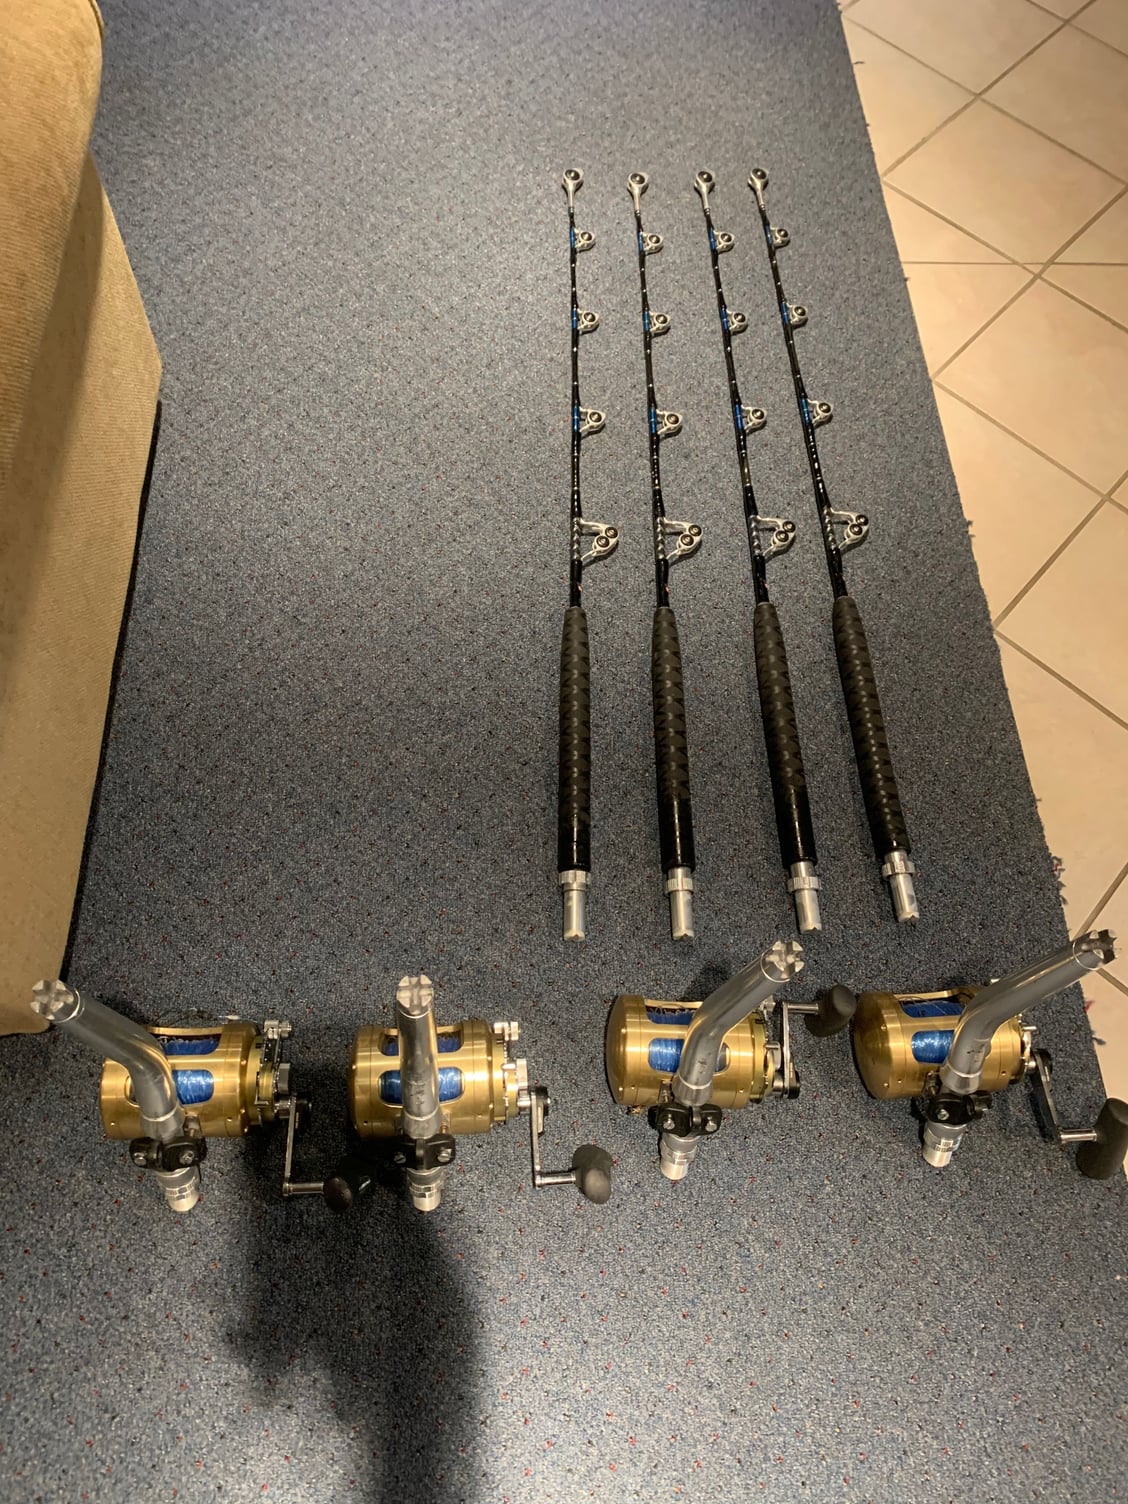 Many Rods and Reels for sale - The Hull Truth - Boating and Fishing Forum